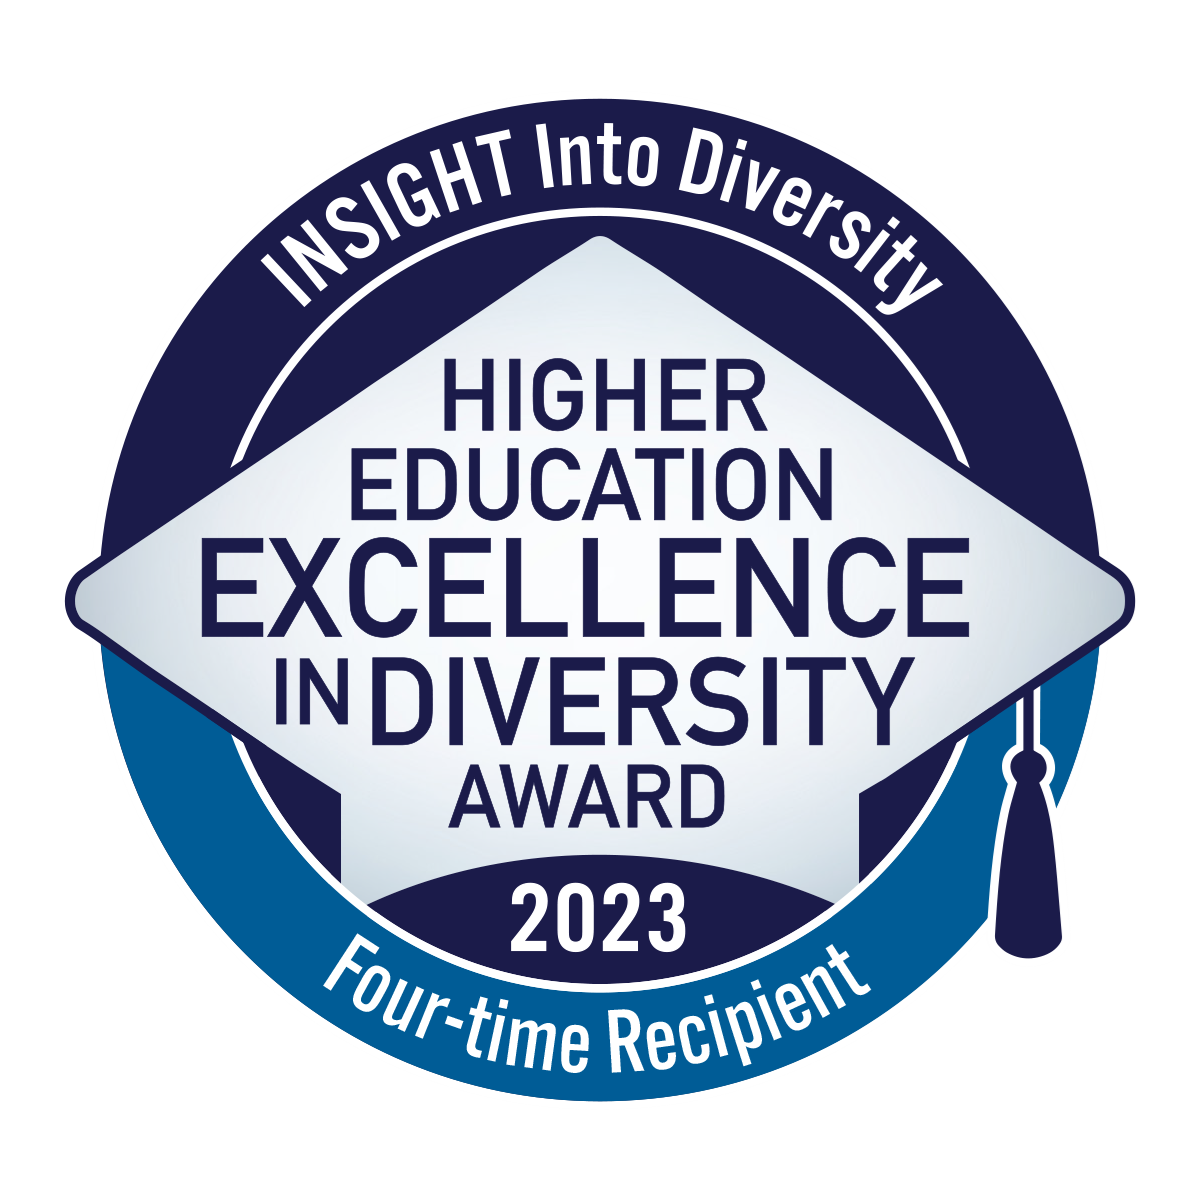 Higher Education Excellence in Diversity Award logo